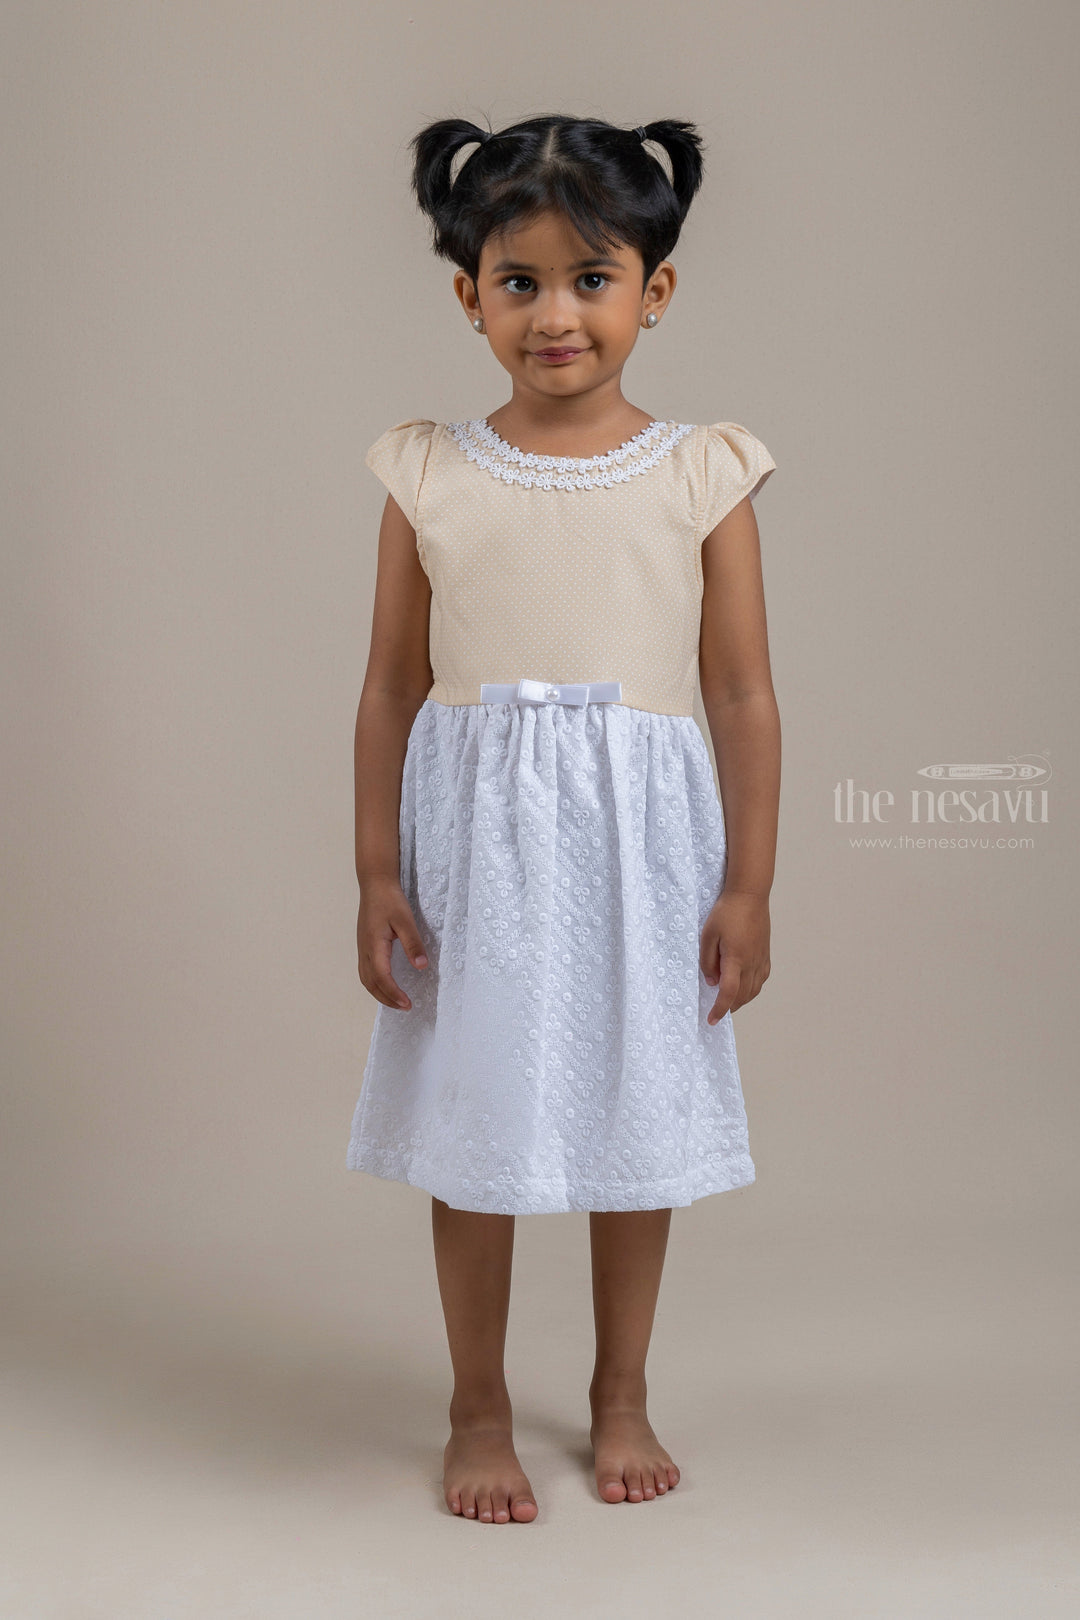 The Nesavu Baby Frock / Jhabla Pretty Floral Necklace Embroidered Beige Yoke And White Floral Embroiderd Frock For Little Girls psr silks Nesavu